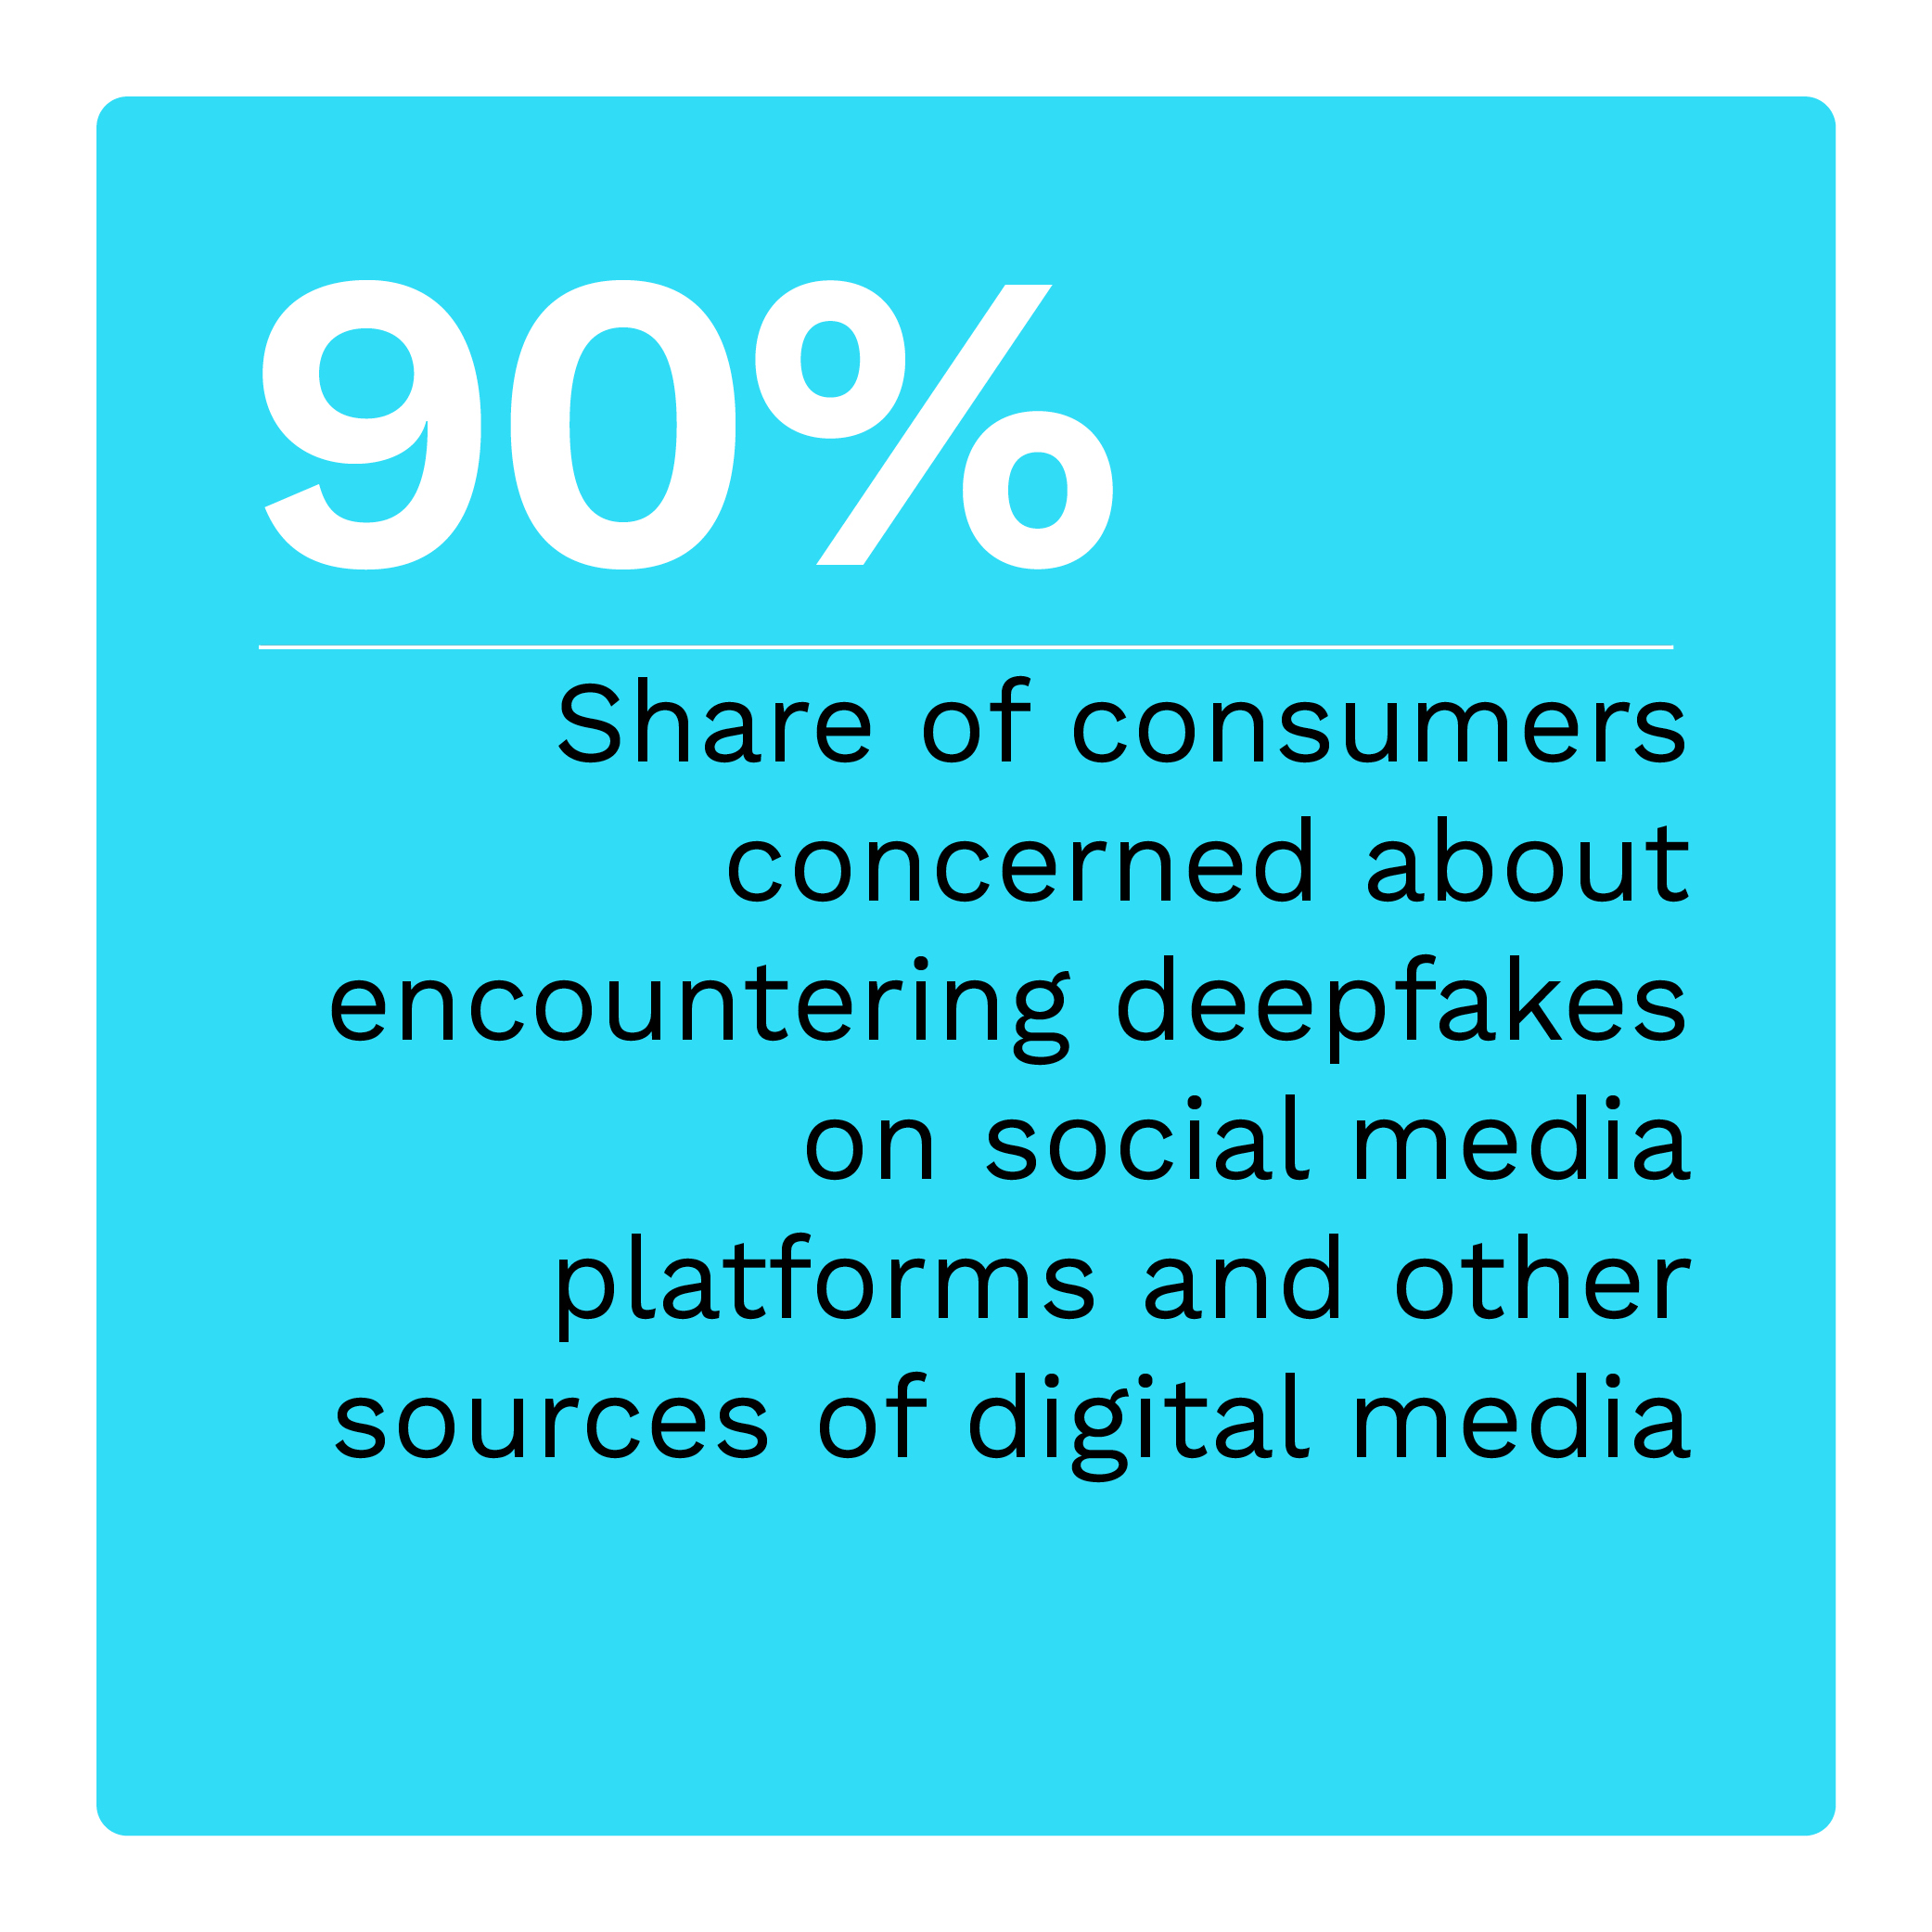 90%: Share of consumers concerned about encountering deepfakes on social media platforms and other sources of digital media